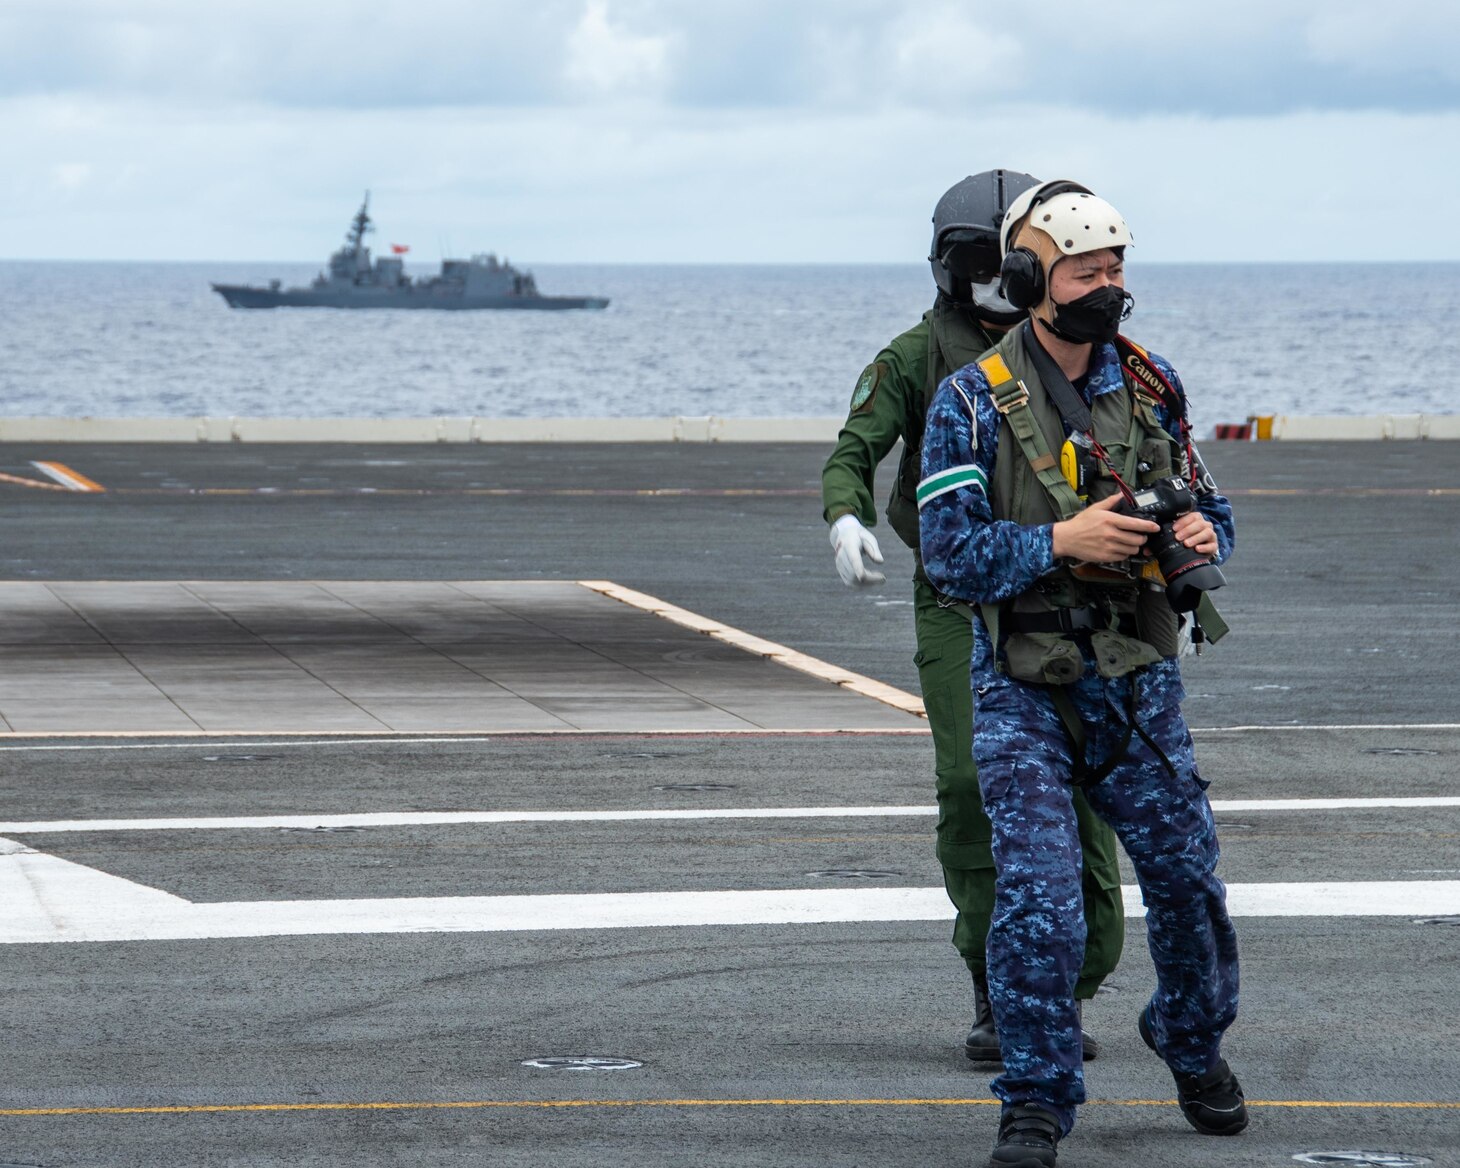 220526-N-BR419-1089 PHILIPPINE SEA (May 26, 2022) Sailors attached to the Japan Maritime Self-Defense Force (JMSDF) destroyer JS Teruzuki (DD 116) take photos on the flight deck of the U.S. Navy’s only forward-deployed aircraft carrier USS Ronald Reagan (CVN 76). The U.S. Navy and JMSDF routinely conduct naval exercises together, strengthening the U.S.-Japan alliance and maintaining a free and open Indo-Pacific region. Ronald Reagan, the flagship of Carrier Strike Group 5, provides a combat-ready force that protects and defends the United States, and supports alliances, partnerships and collective maritime interests in the Indo-Pacific region. (U.S. Navy photo by Mass Communication Specialist 3rd Class Oswald Felix Jr.)